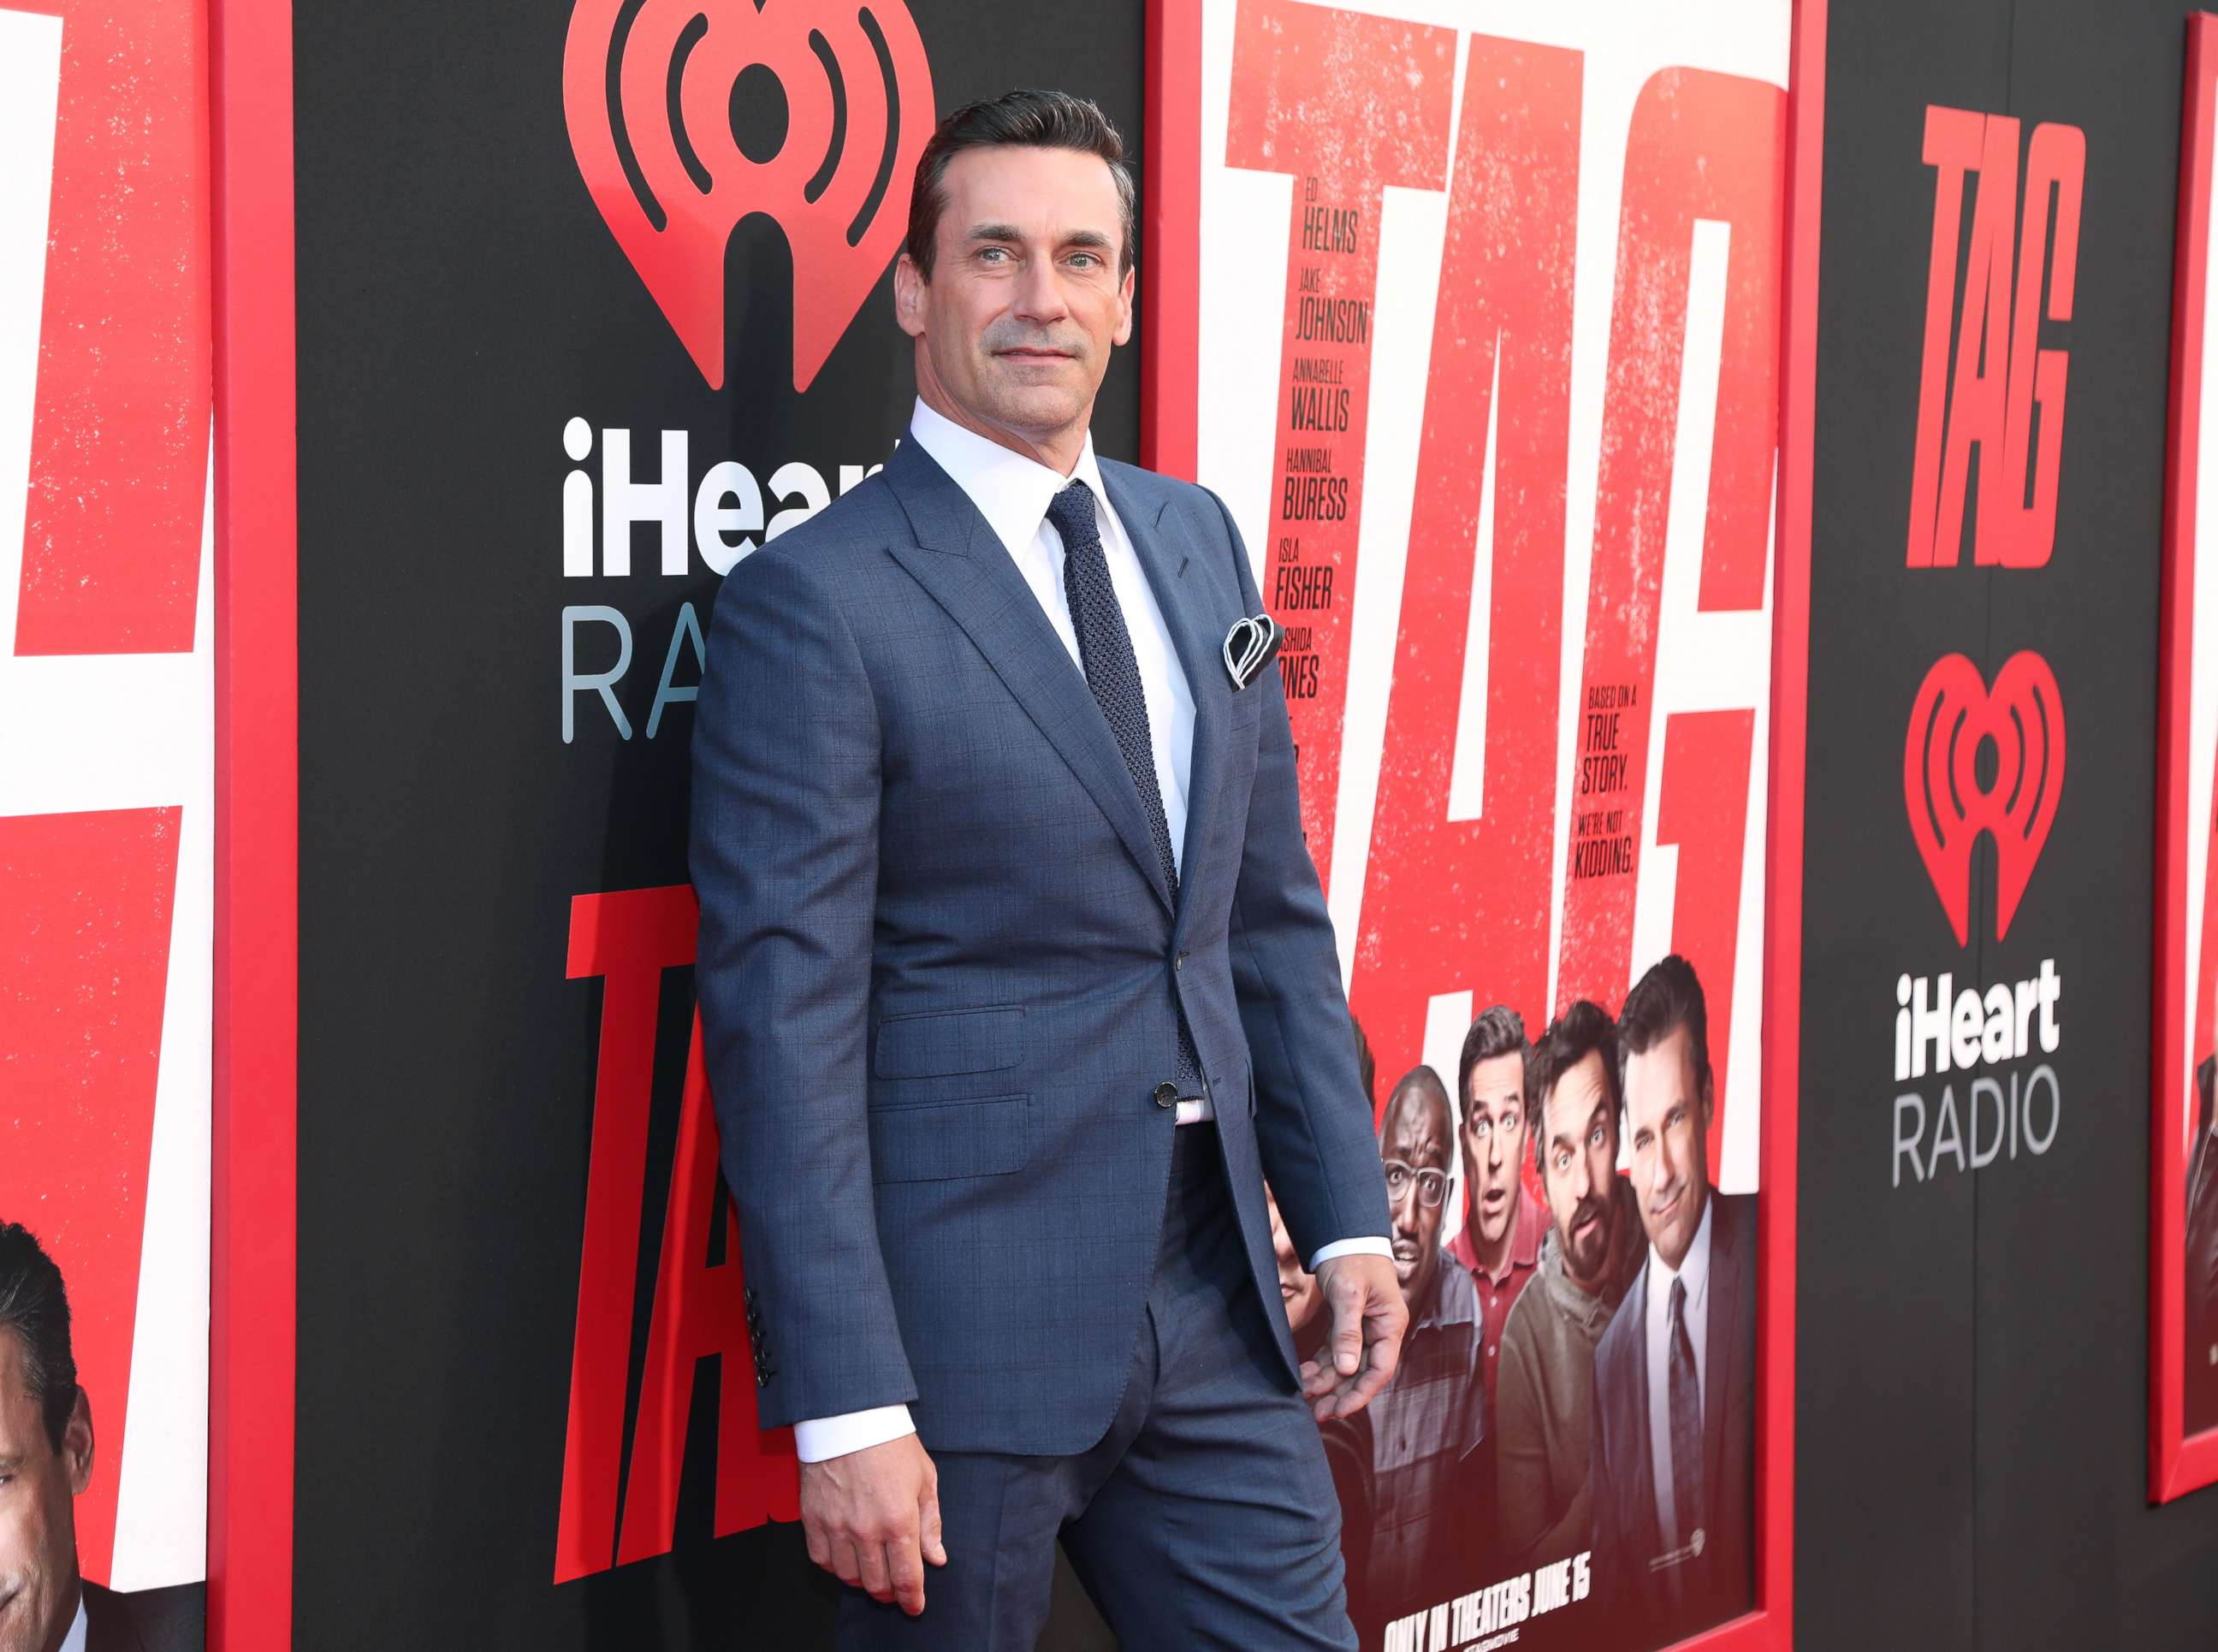 PHOTO: Jon Hamm attends the Premiere Of Warner Bros. Pictures And New Line Cinema's "Tag" at Regency Village Theatre, June 7, 2018, in Westwood, California.  